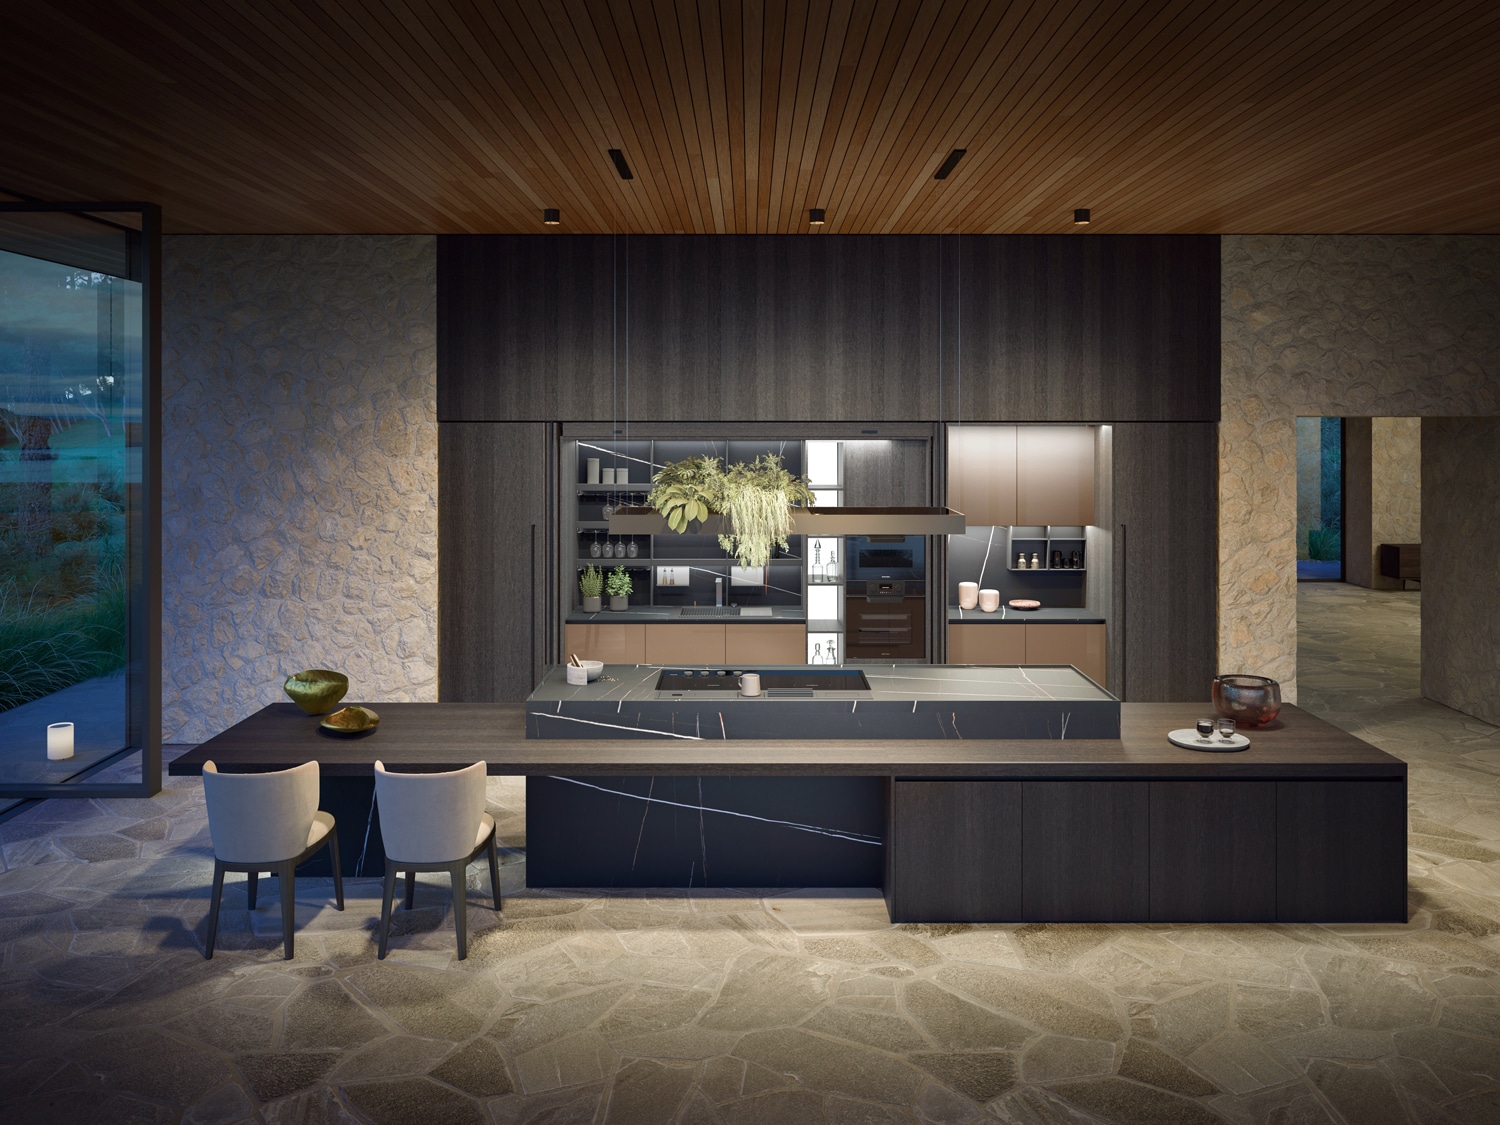 The kitchen uses the Hide system to conceal key, customized functional areas located along the pantry wall. 